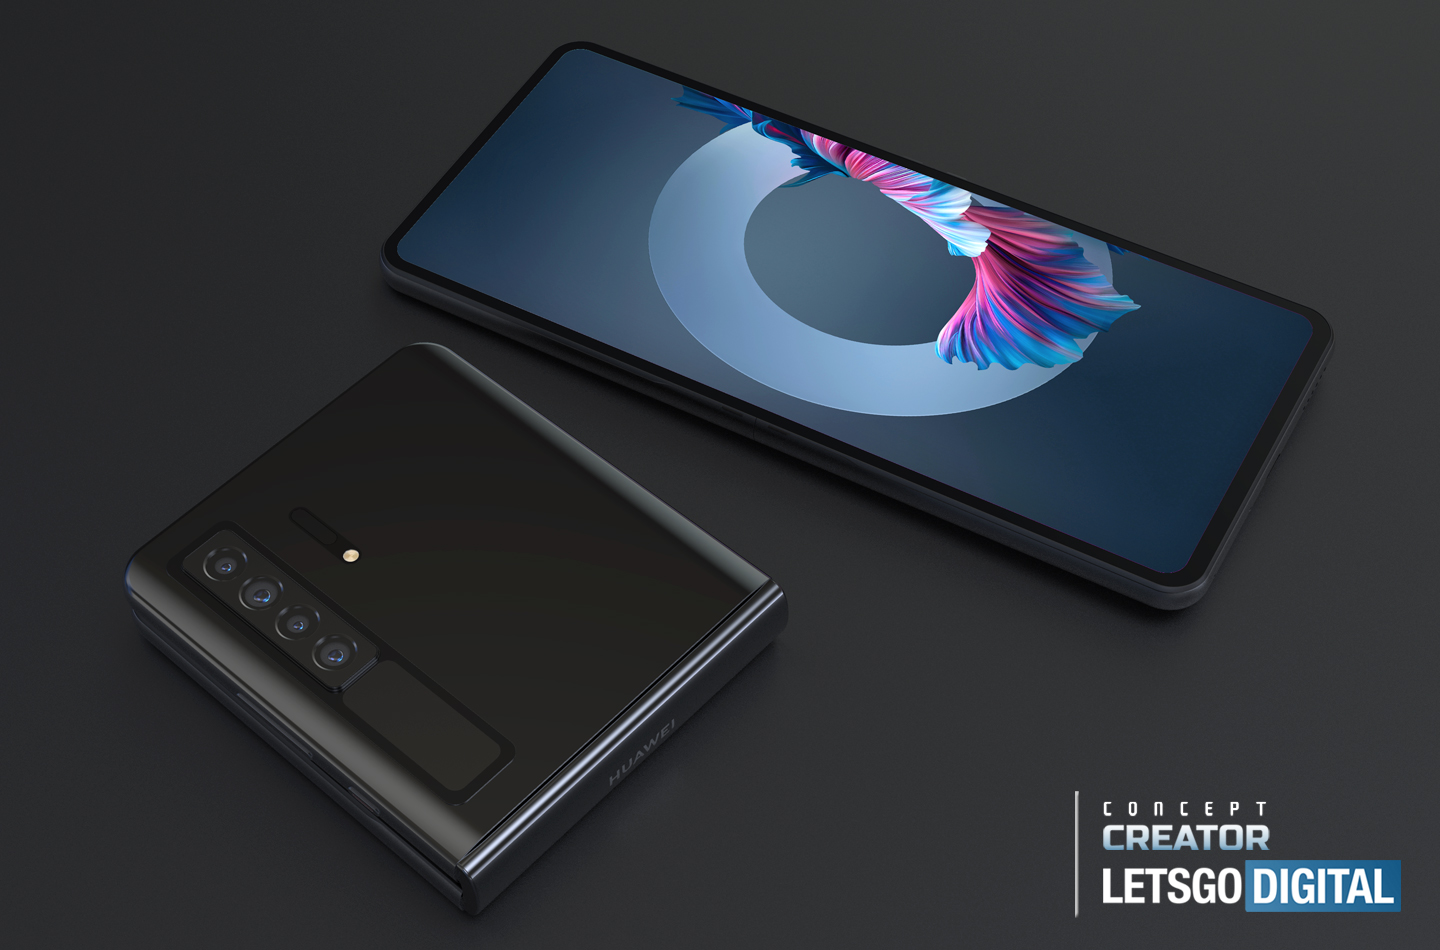 Huawei may unveil new foldable smartphone Mate V this month - December 23